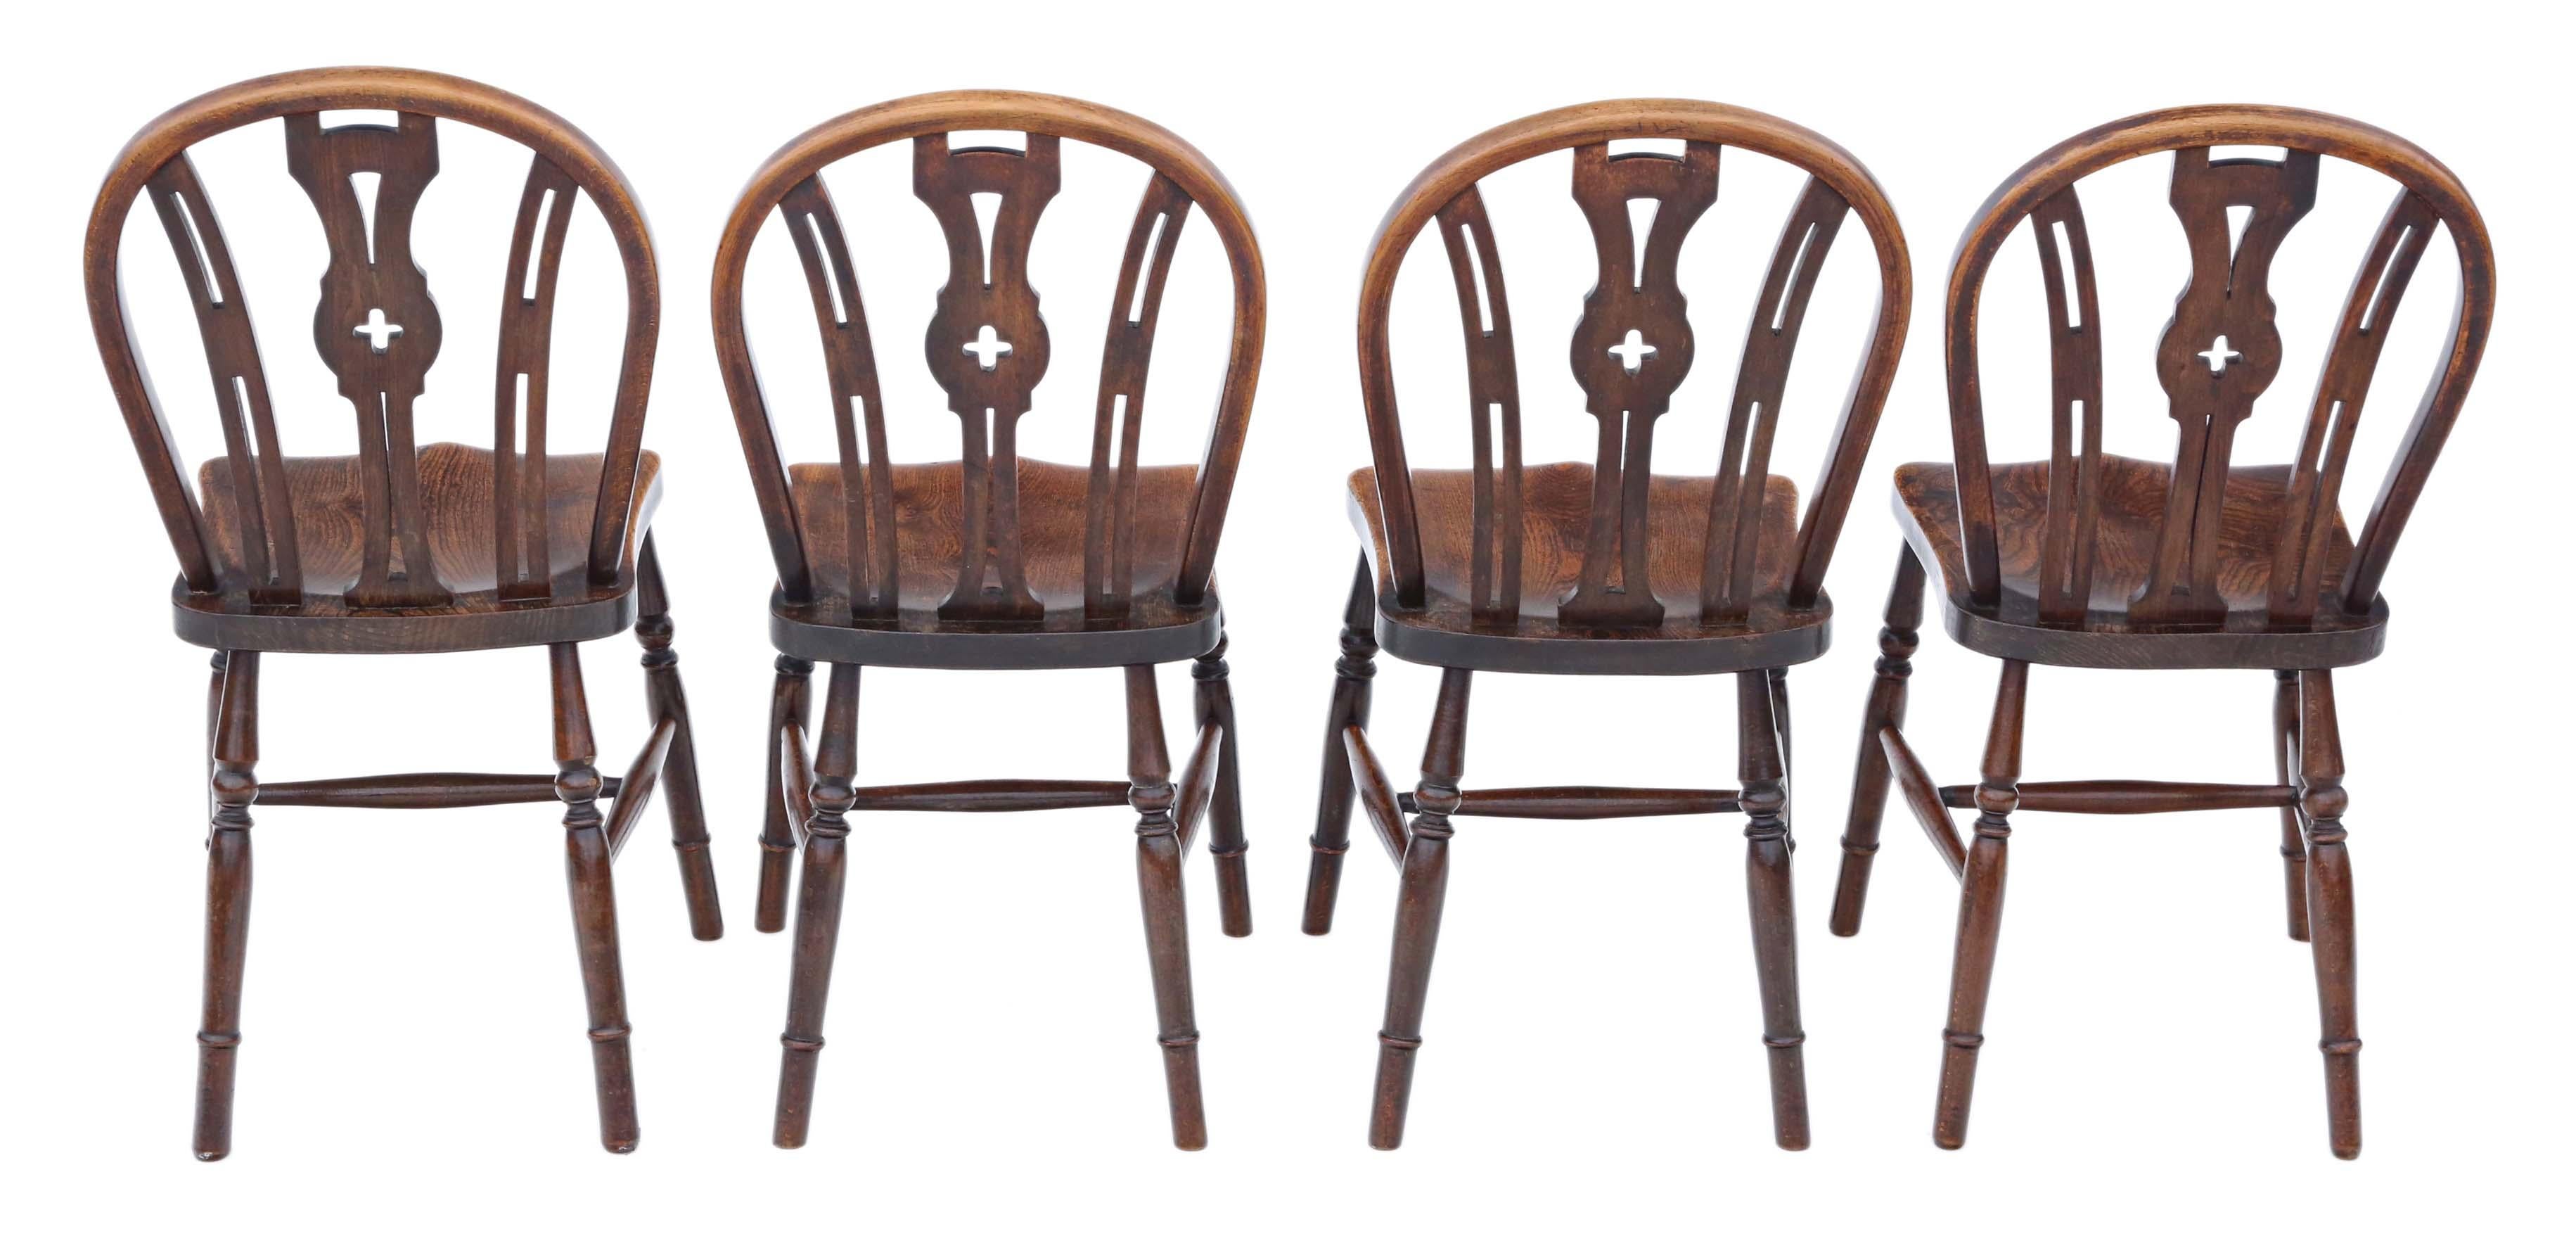 Antique quality set of 4 elm and beech kitchen dining chairs C1900.

Solid, no loose joints and no woodworm. Full of age, character and charm.

Would look great in the right location!

Overall maximum dimensions: 44cm W x 47cm D x 92cm H (45cm